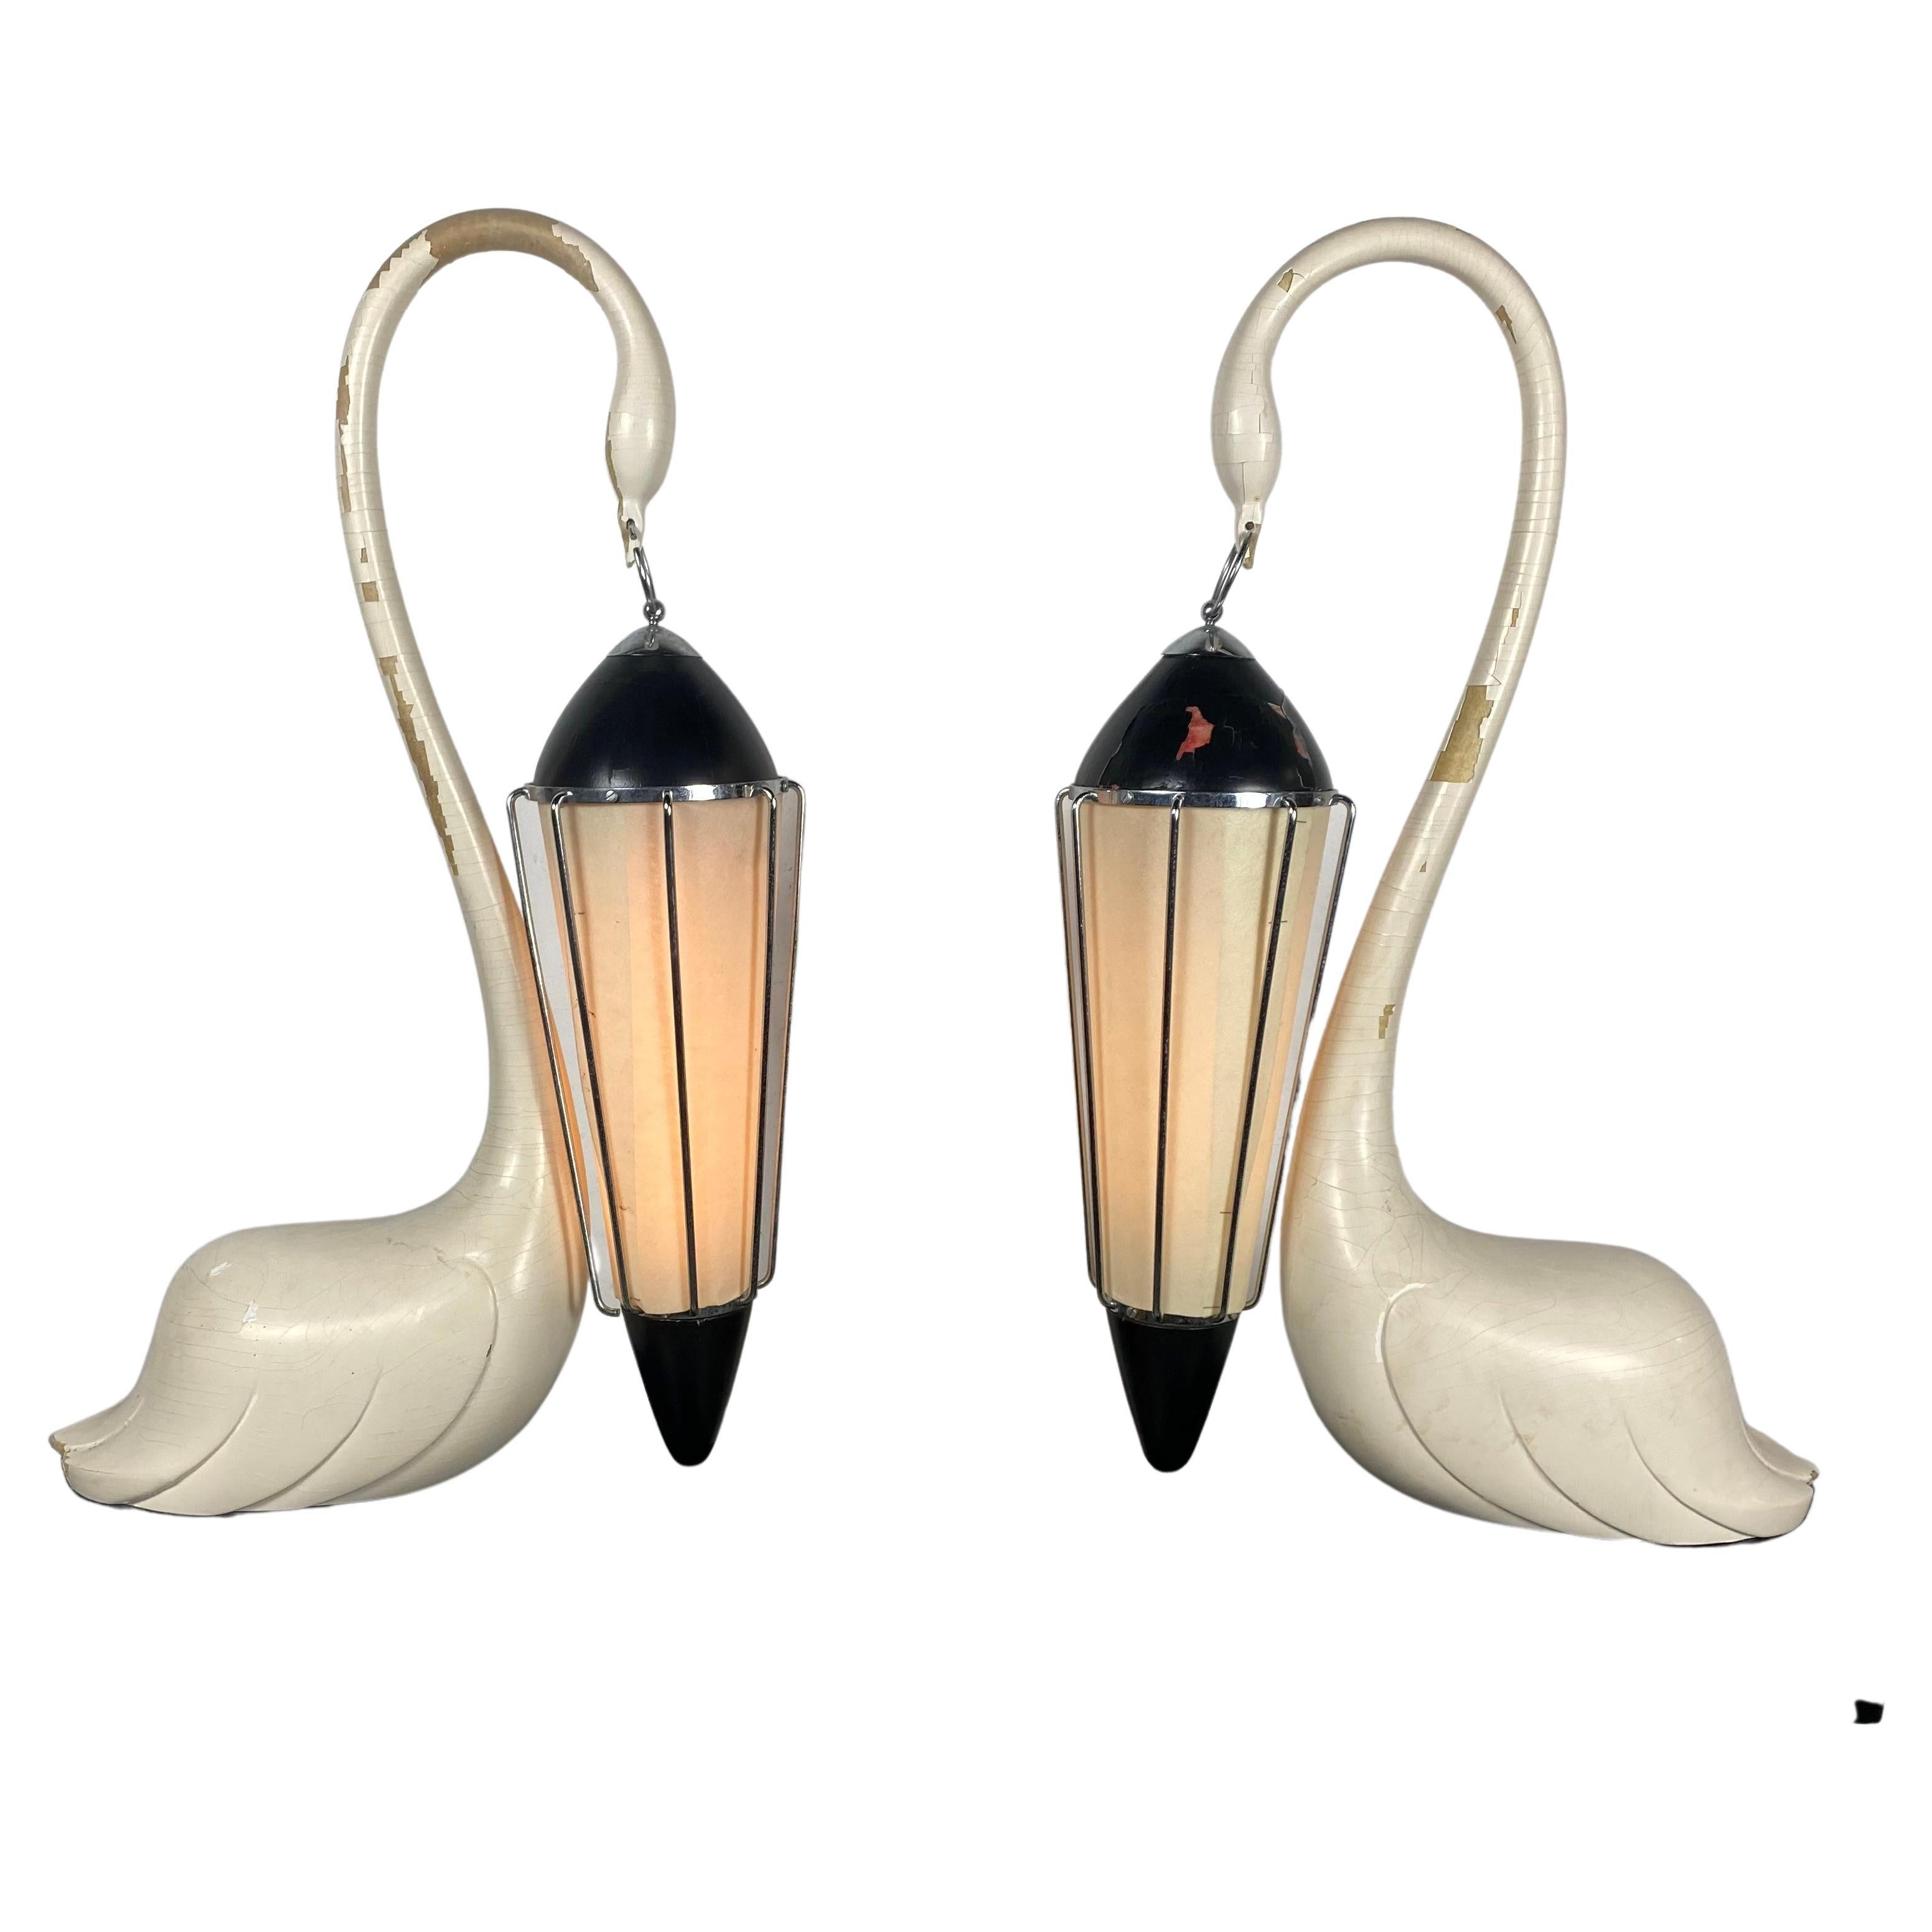 Pair Vintage Aldo Tura Swan Lacquer Wood and Brass Lamps, 1950s, Italy For Sale